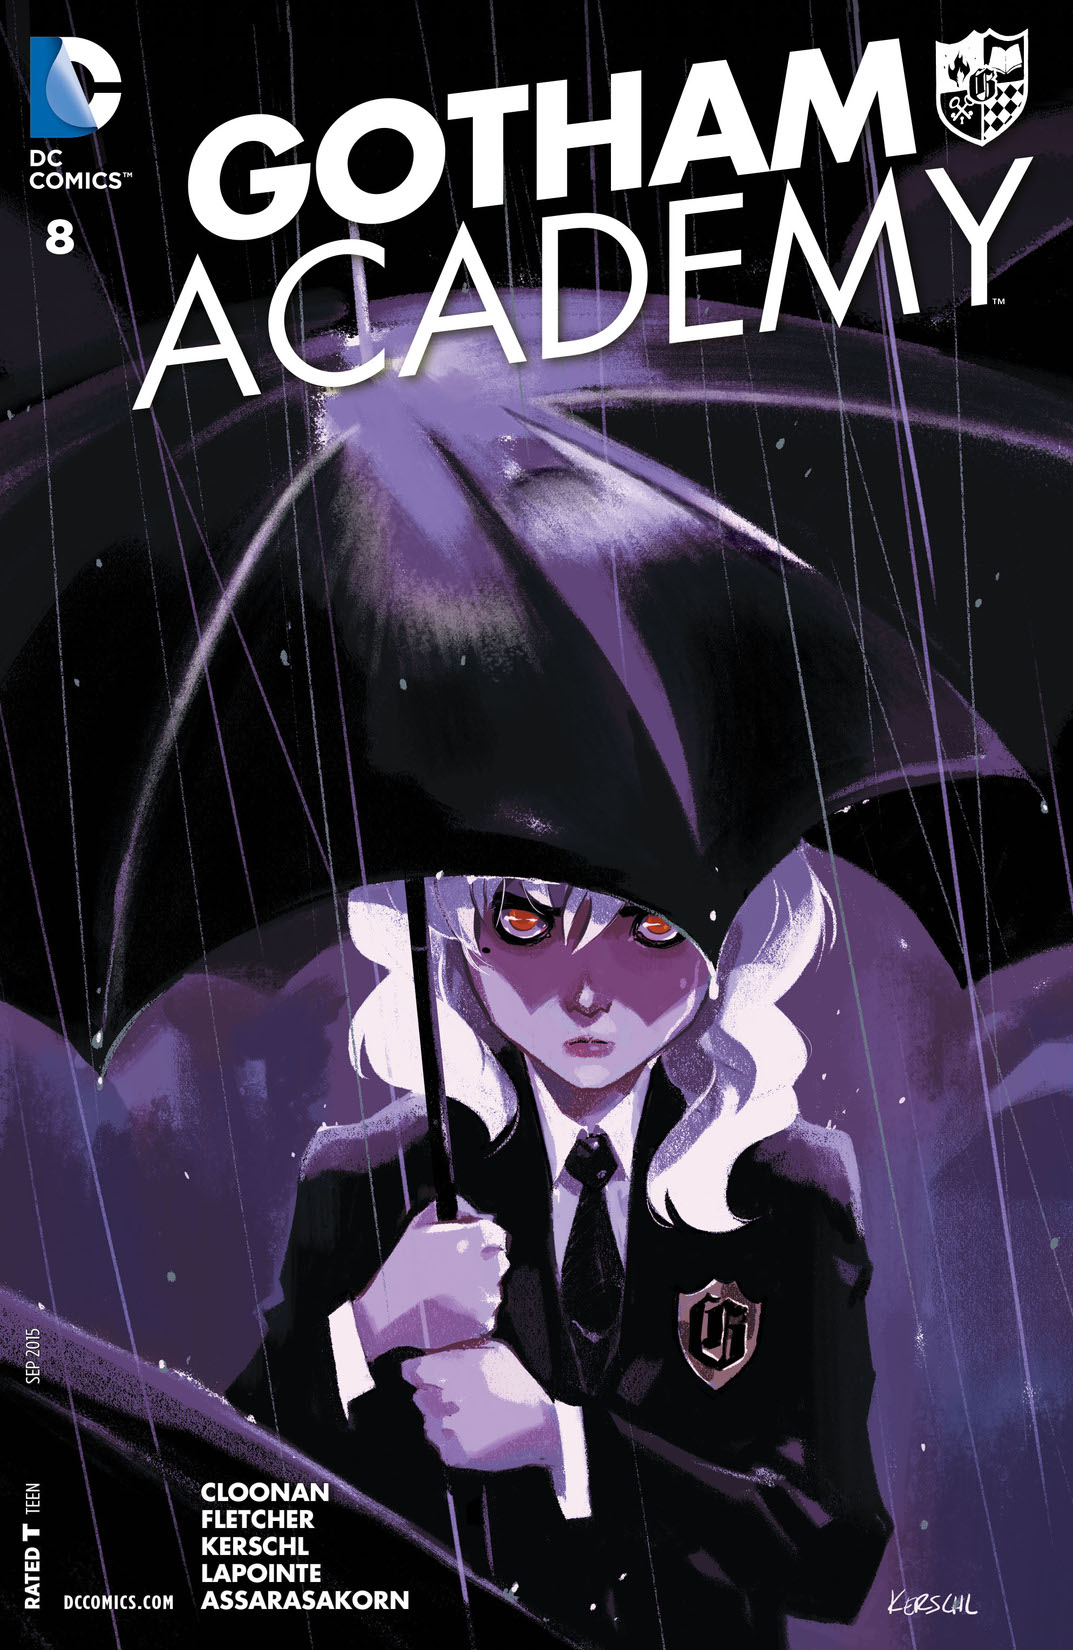 Gotham Academy #8 preview images